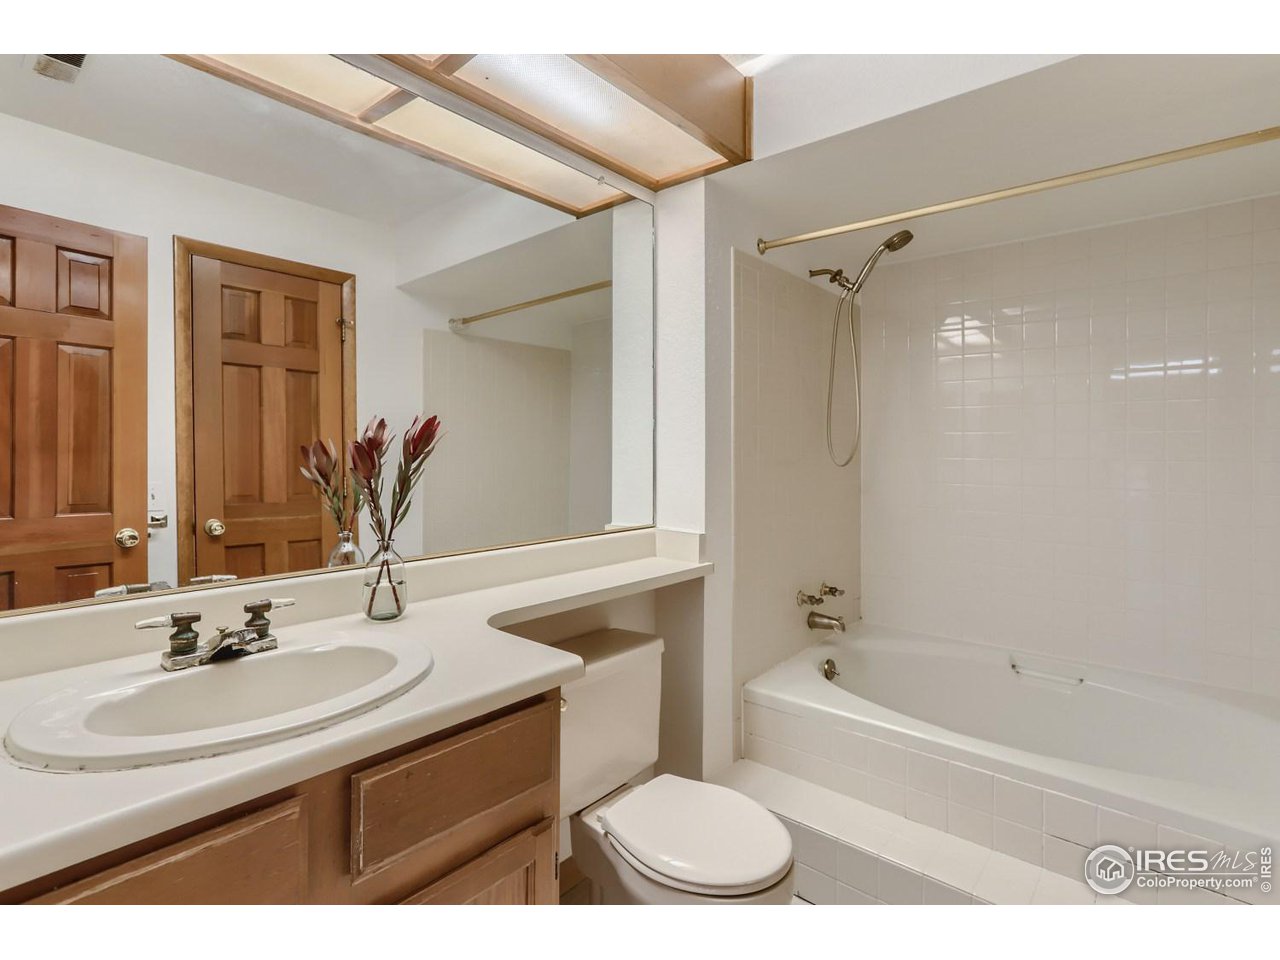 Primary Bathroom, features a large garden tub.